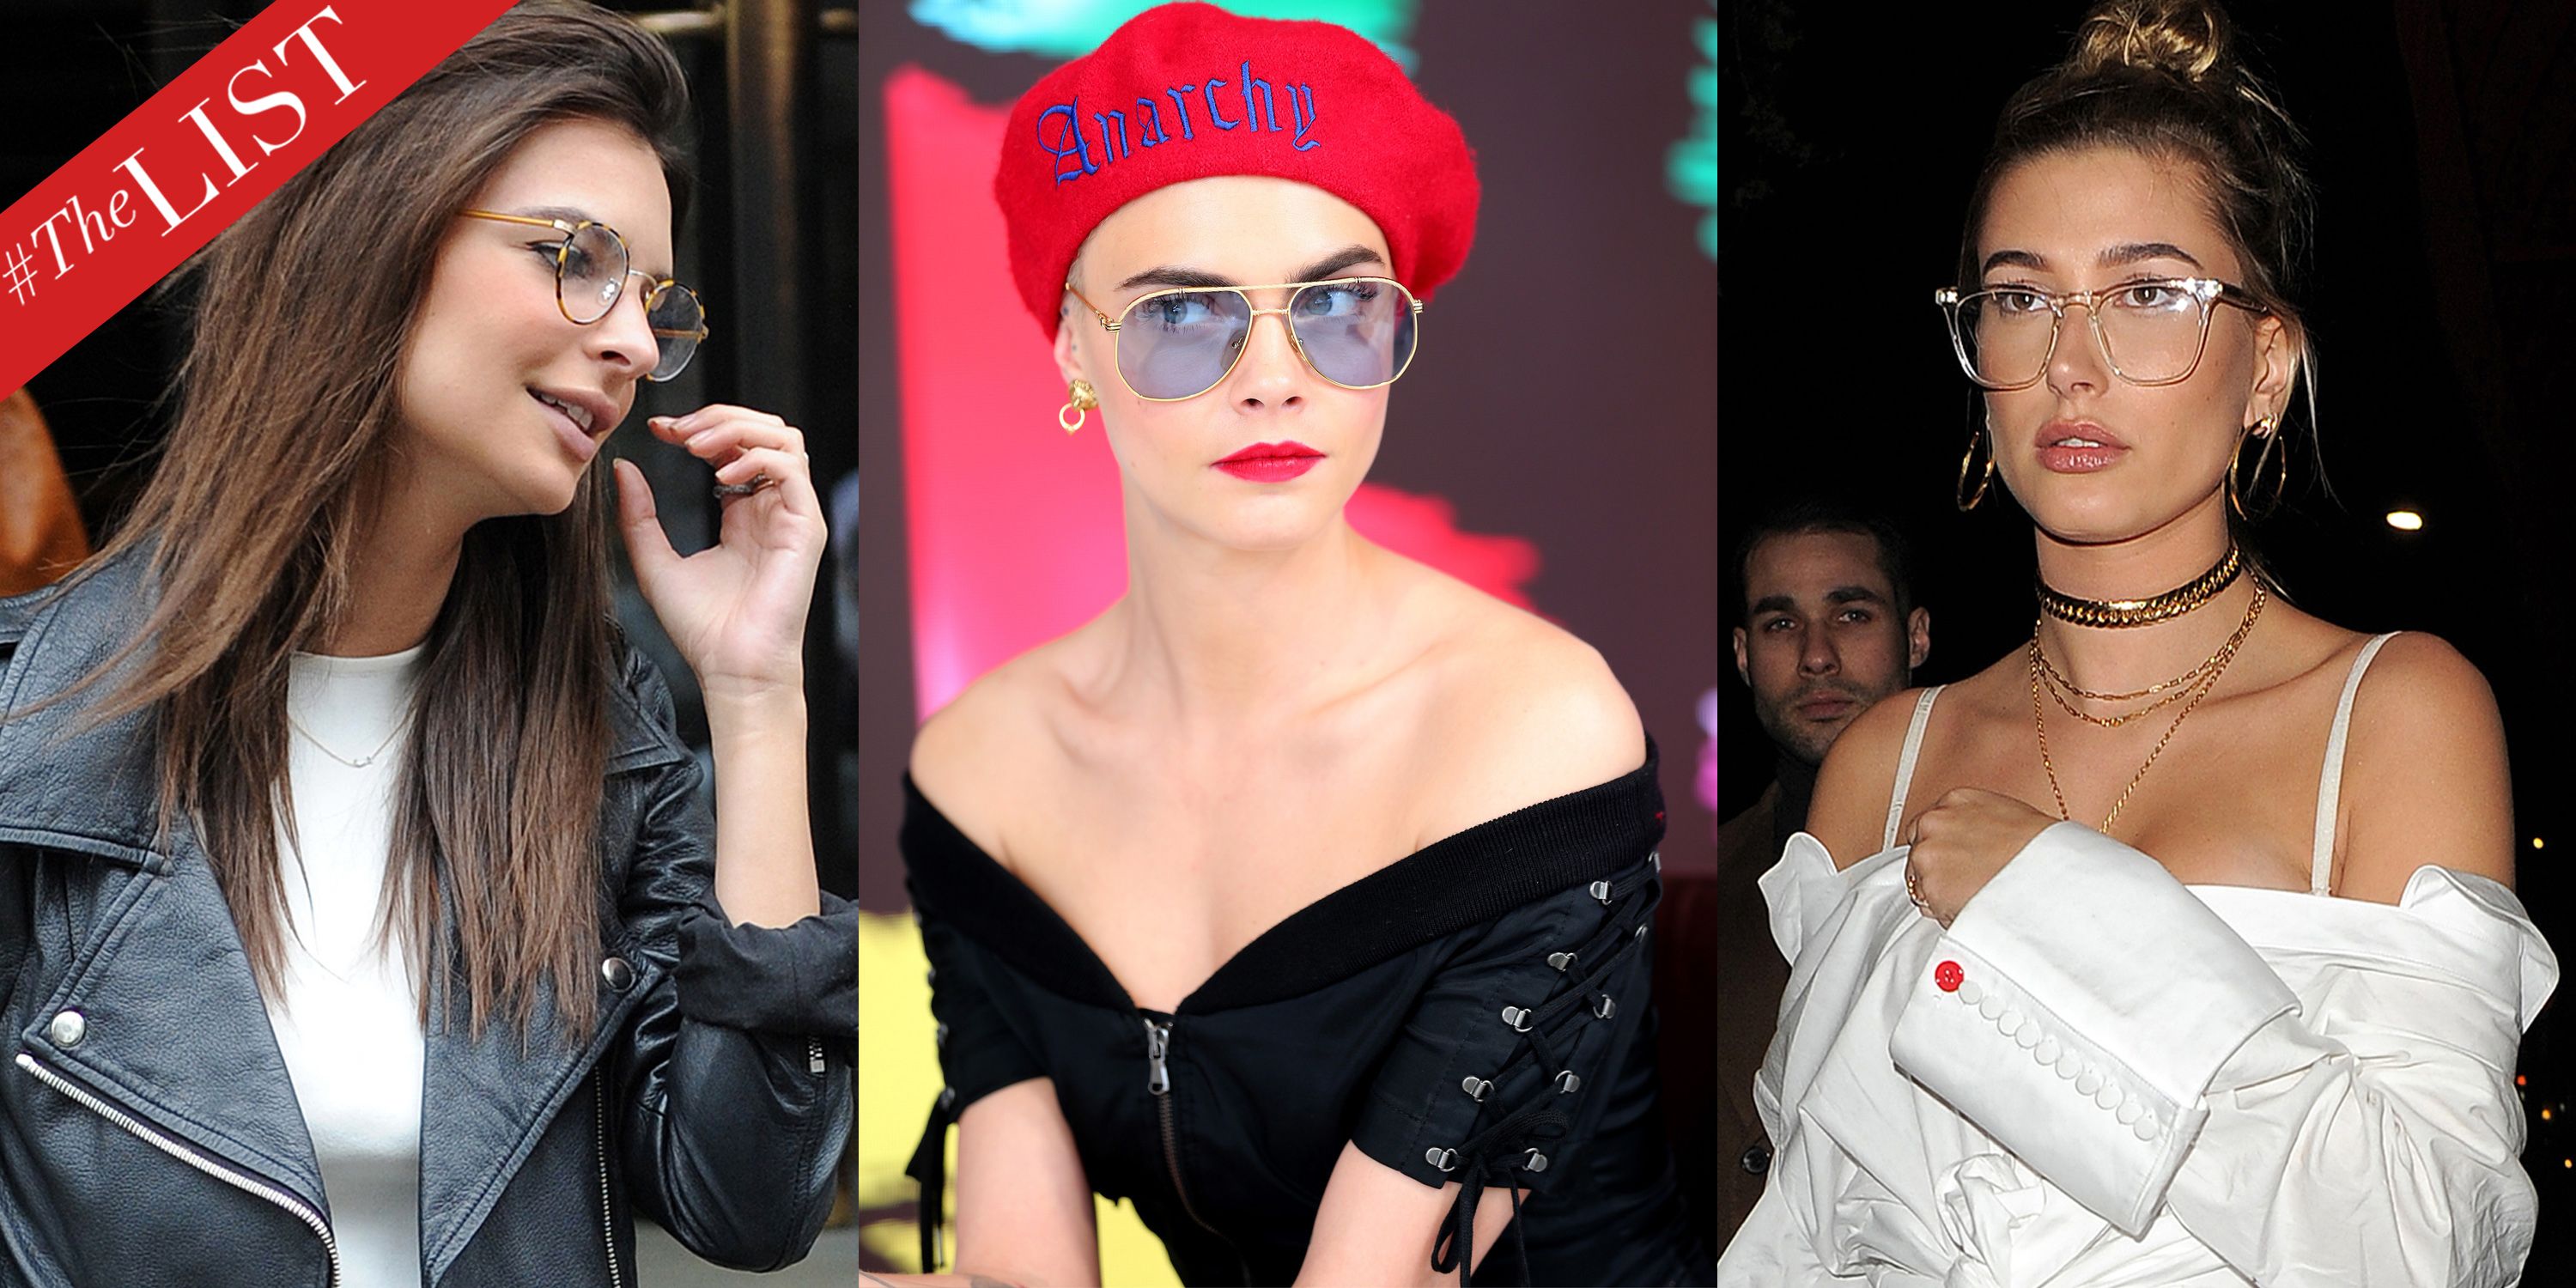 The Most Stylish Pairs Of Four Eyes-Girls In Glasses